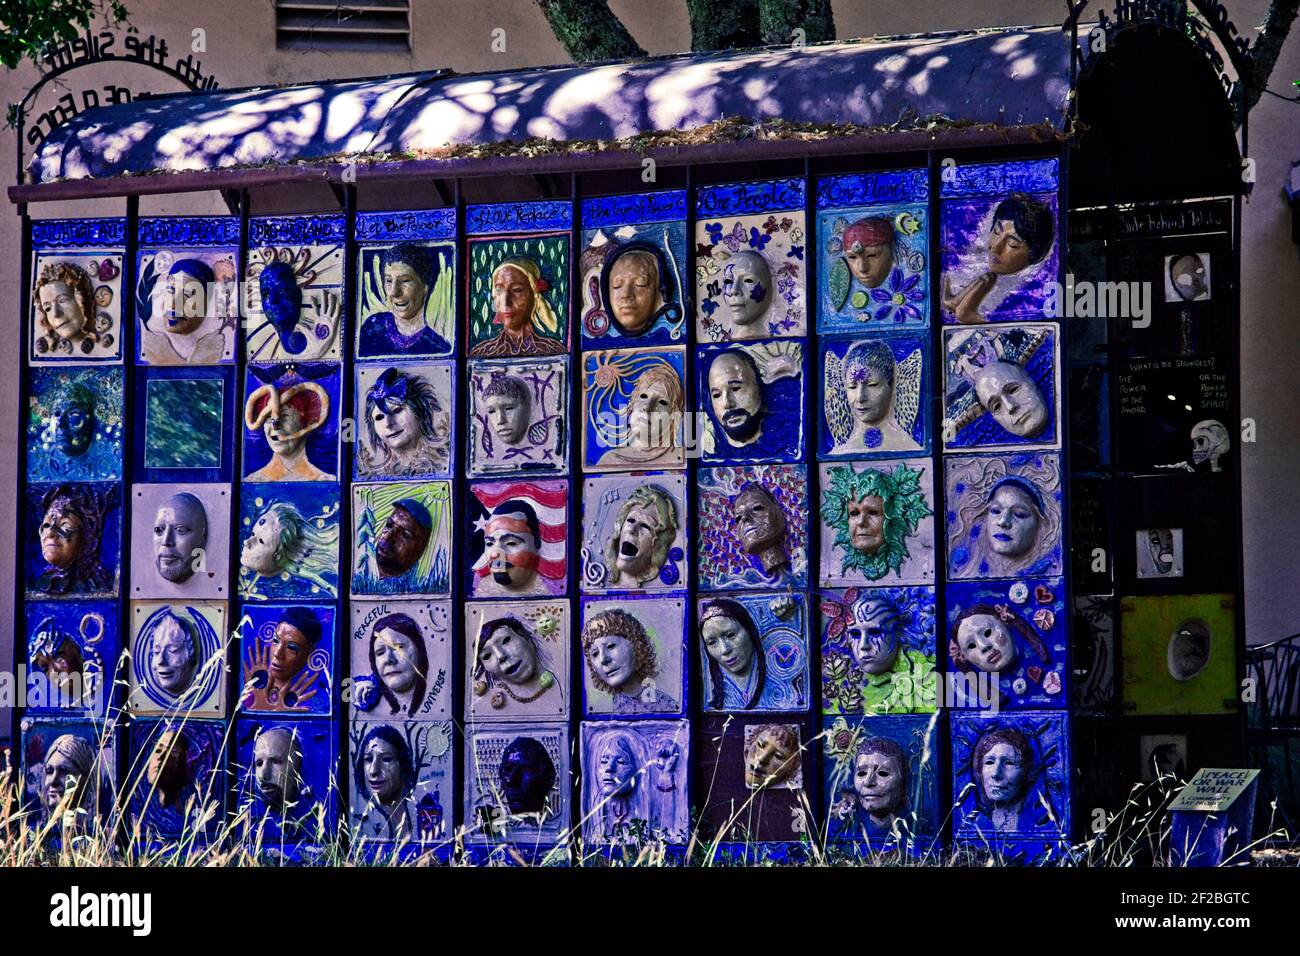 In the hills east of Santa Rosa, California, there is a grove of metal art sculptures called Marijke's Grove. This 'Peace Or War Wall' of faces Stock Photo